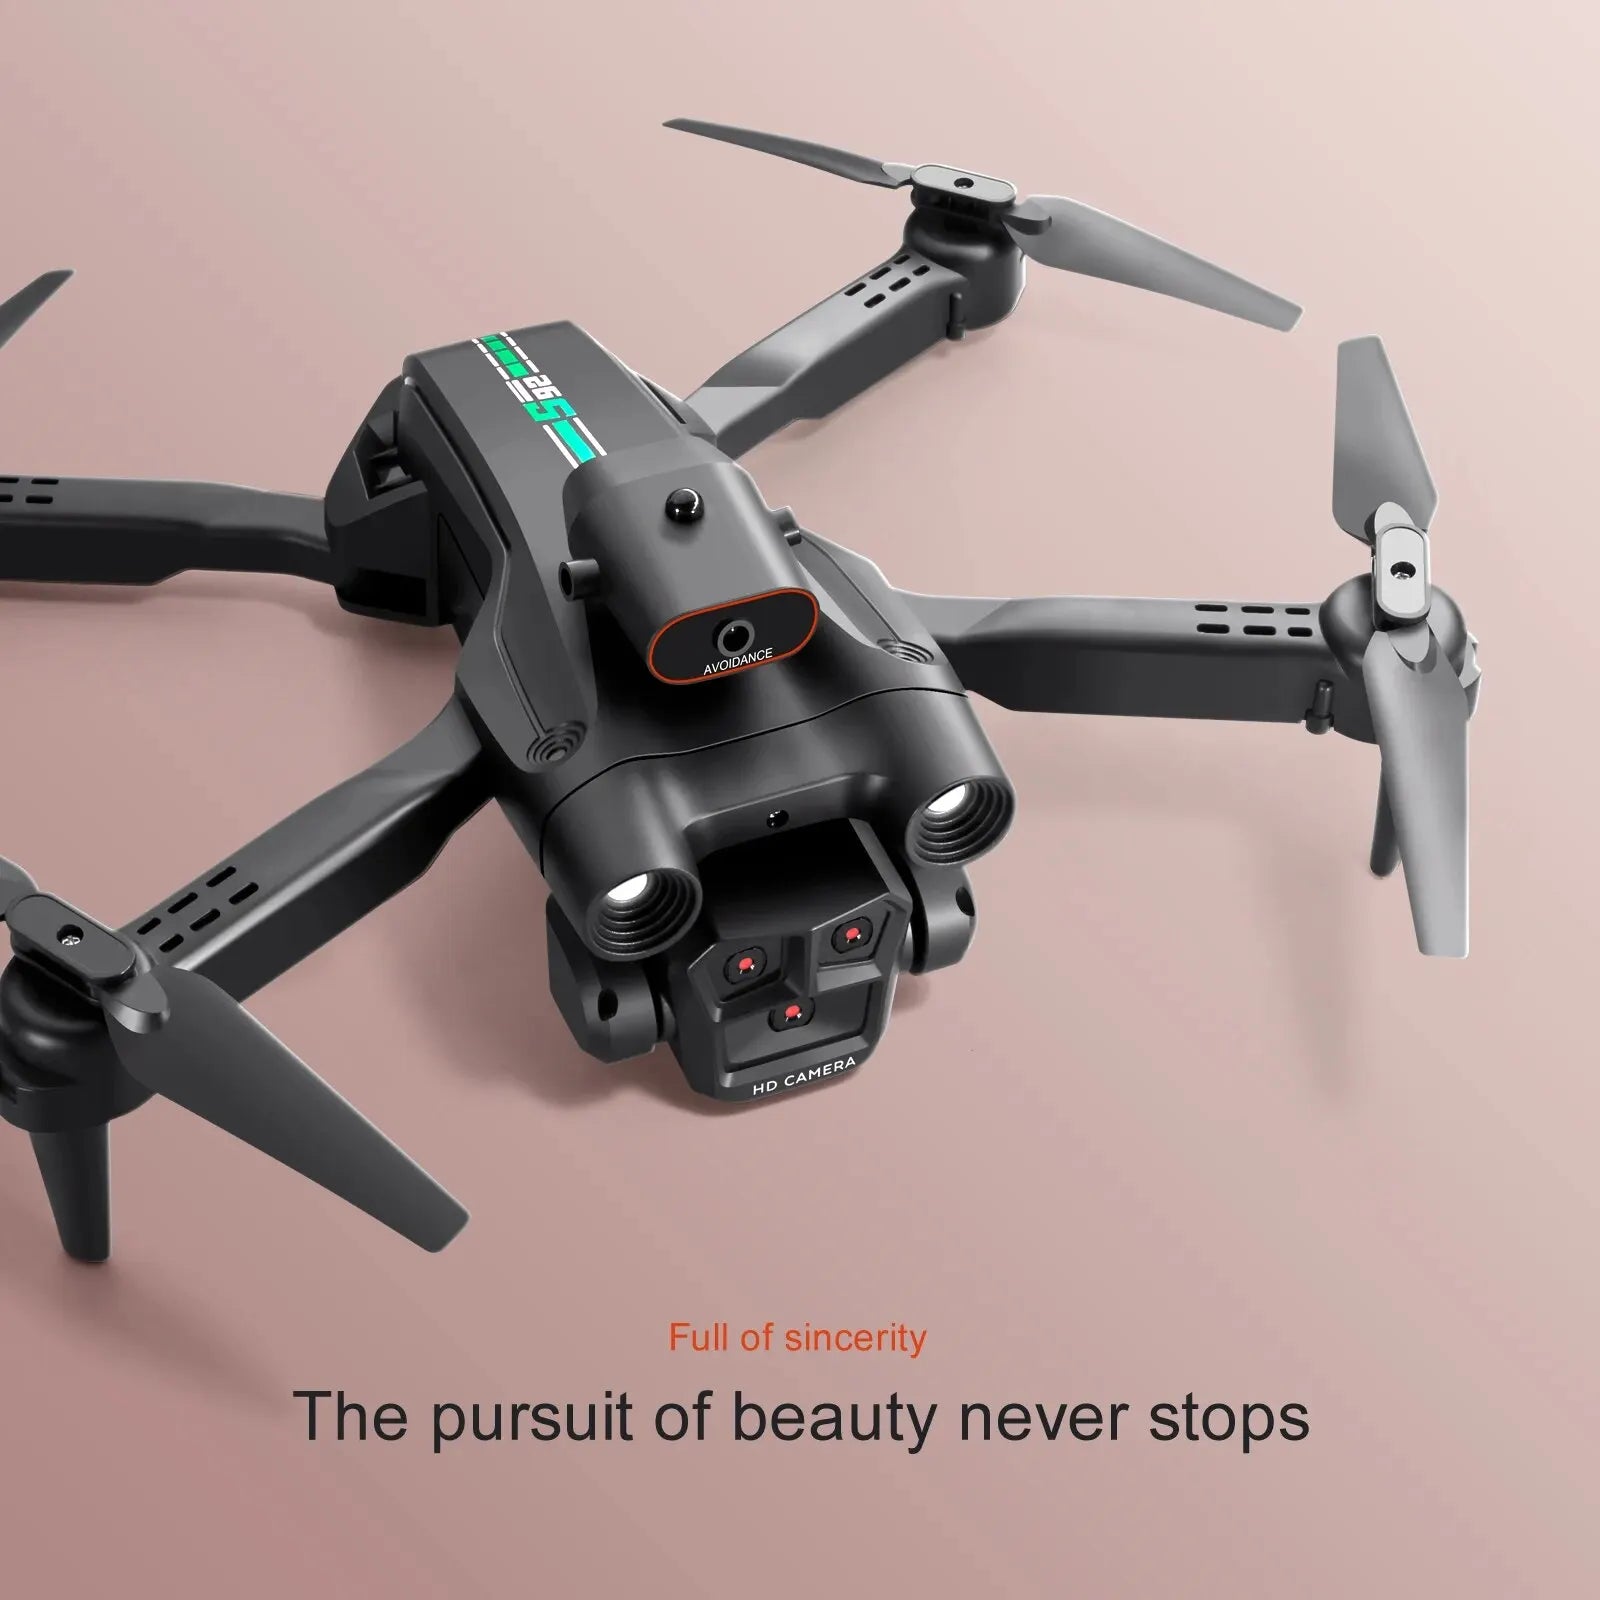 S92 Drone, Full of sincerity The pursuit of beauty never stops AVOIDANCE CAMERA